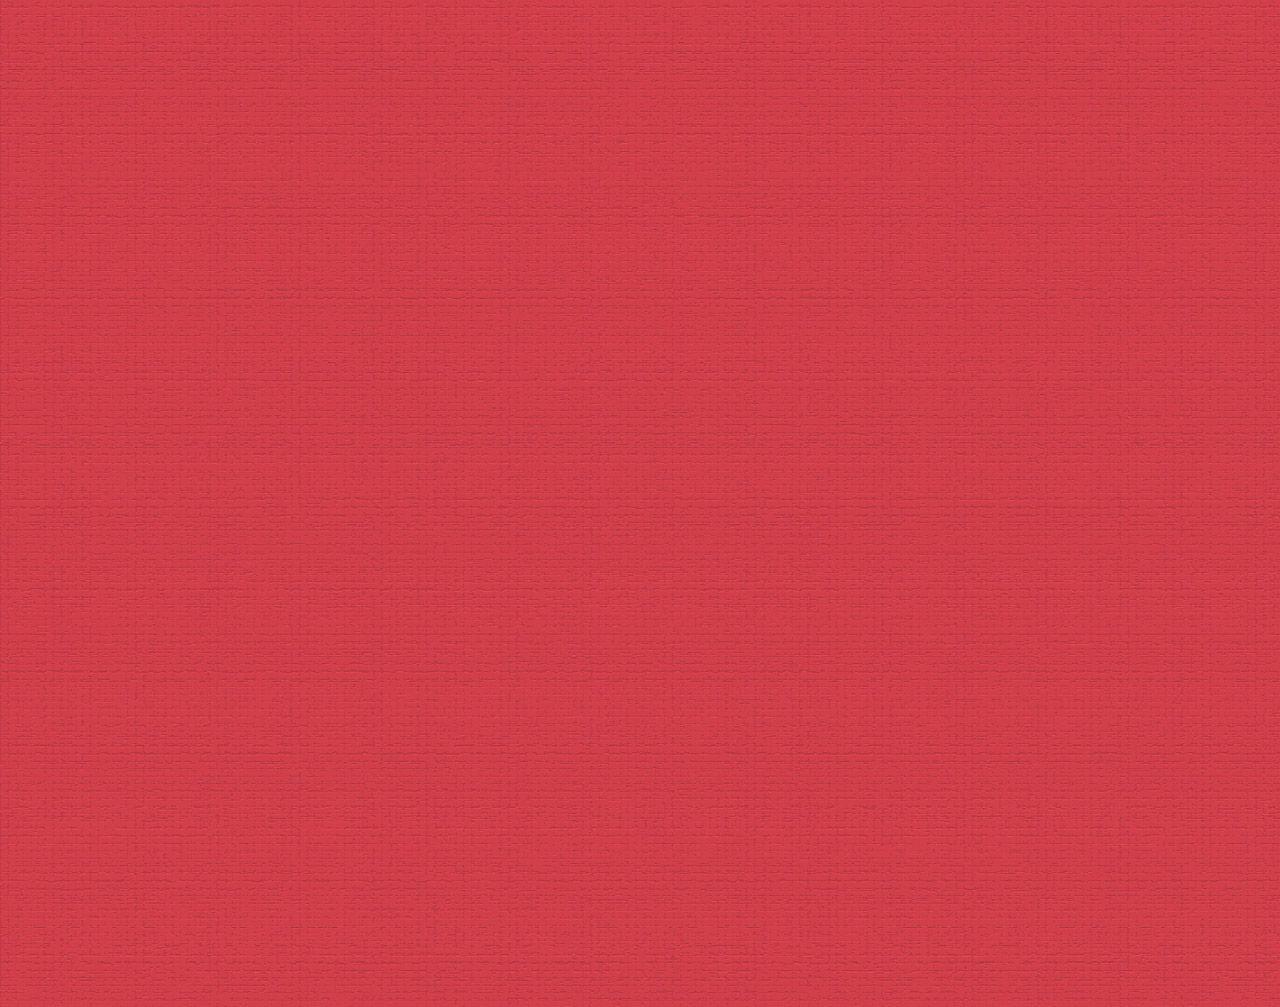 Solid red backgrounds green solid color backgrounds purple solid